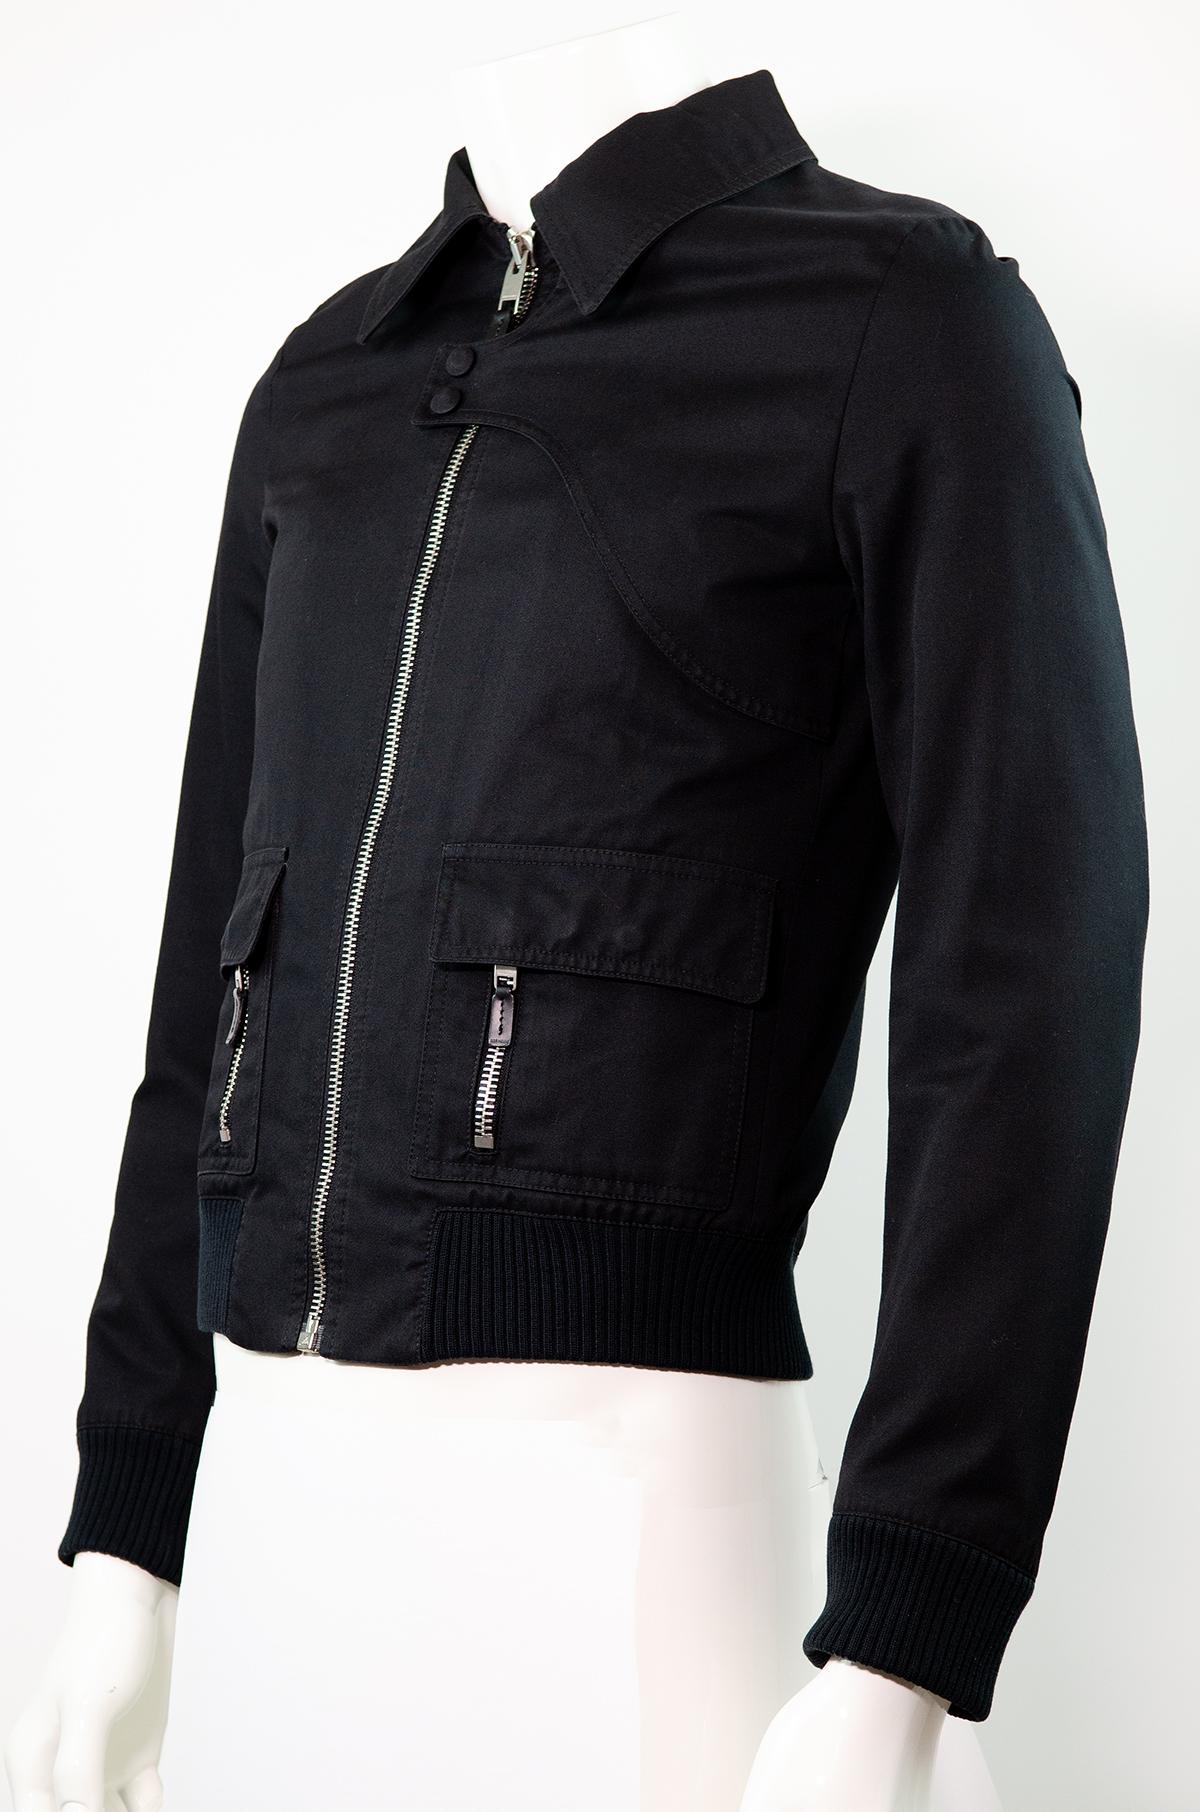 DIOR HOMME By HEDI SLIMANE S/S 2007 Harrington Jacket  In Good Condition For Sale In Berlin, BE